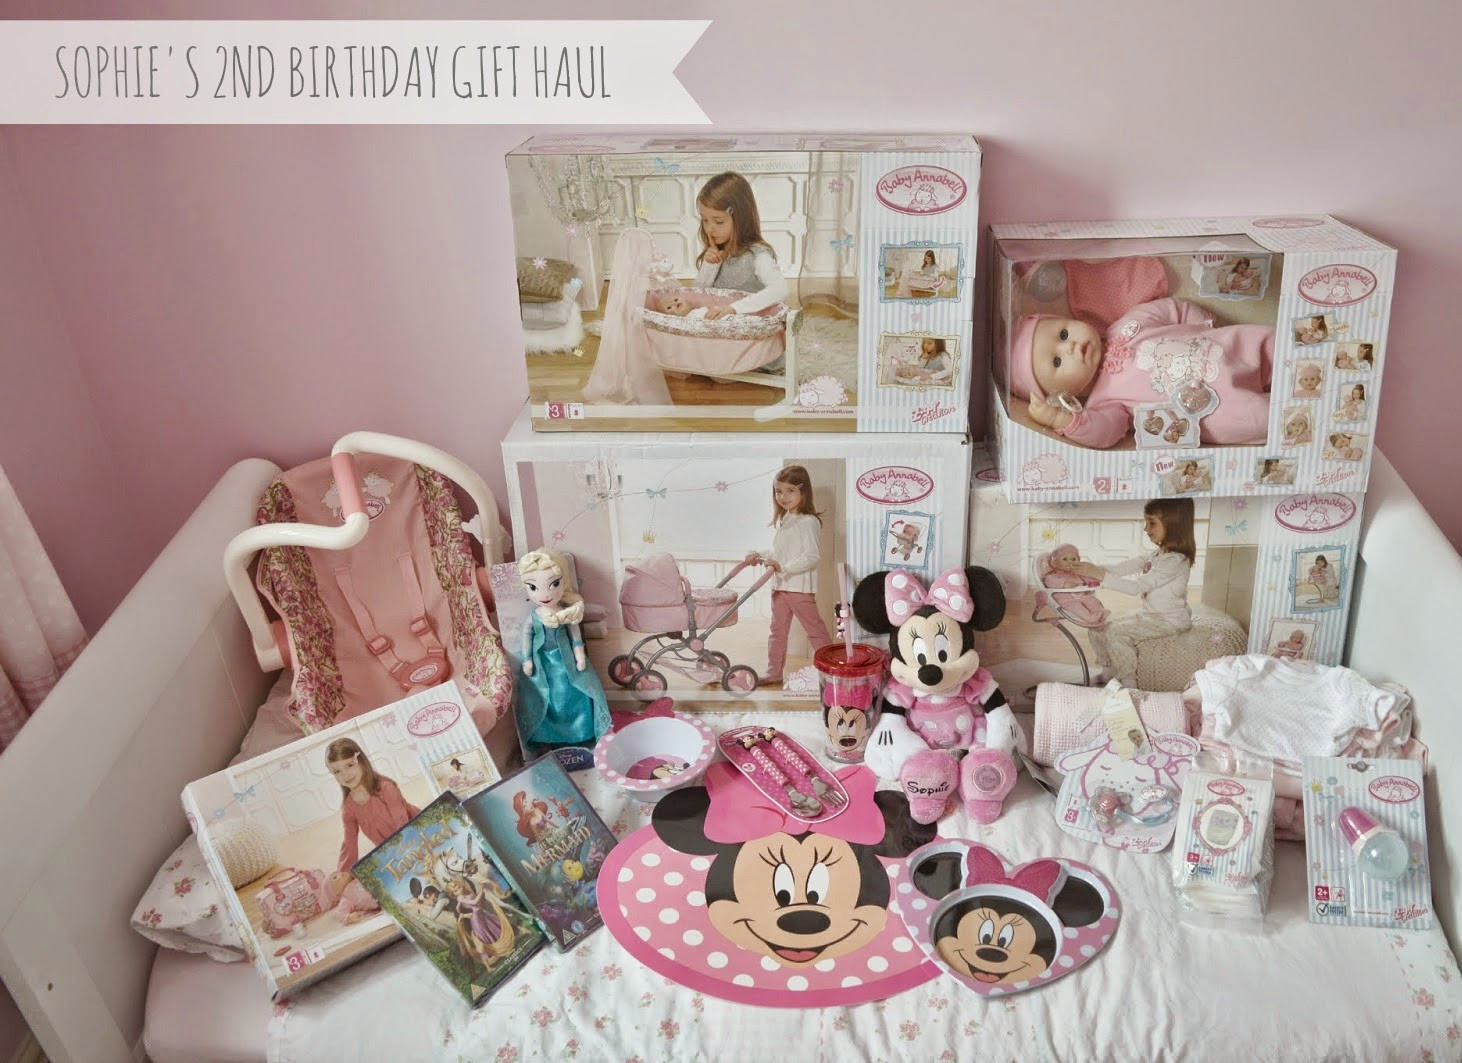 2Nd Birthday Gift Ideas For Girls
 Sophie s 2nd Birthday Gift Haul